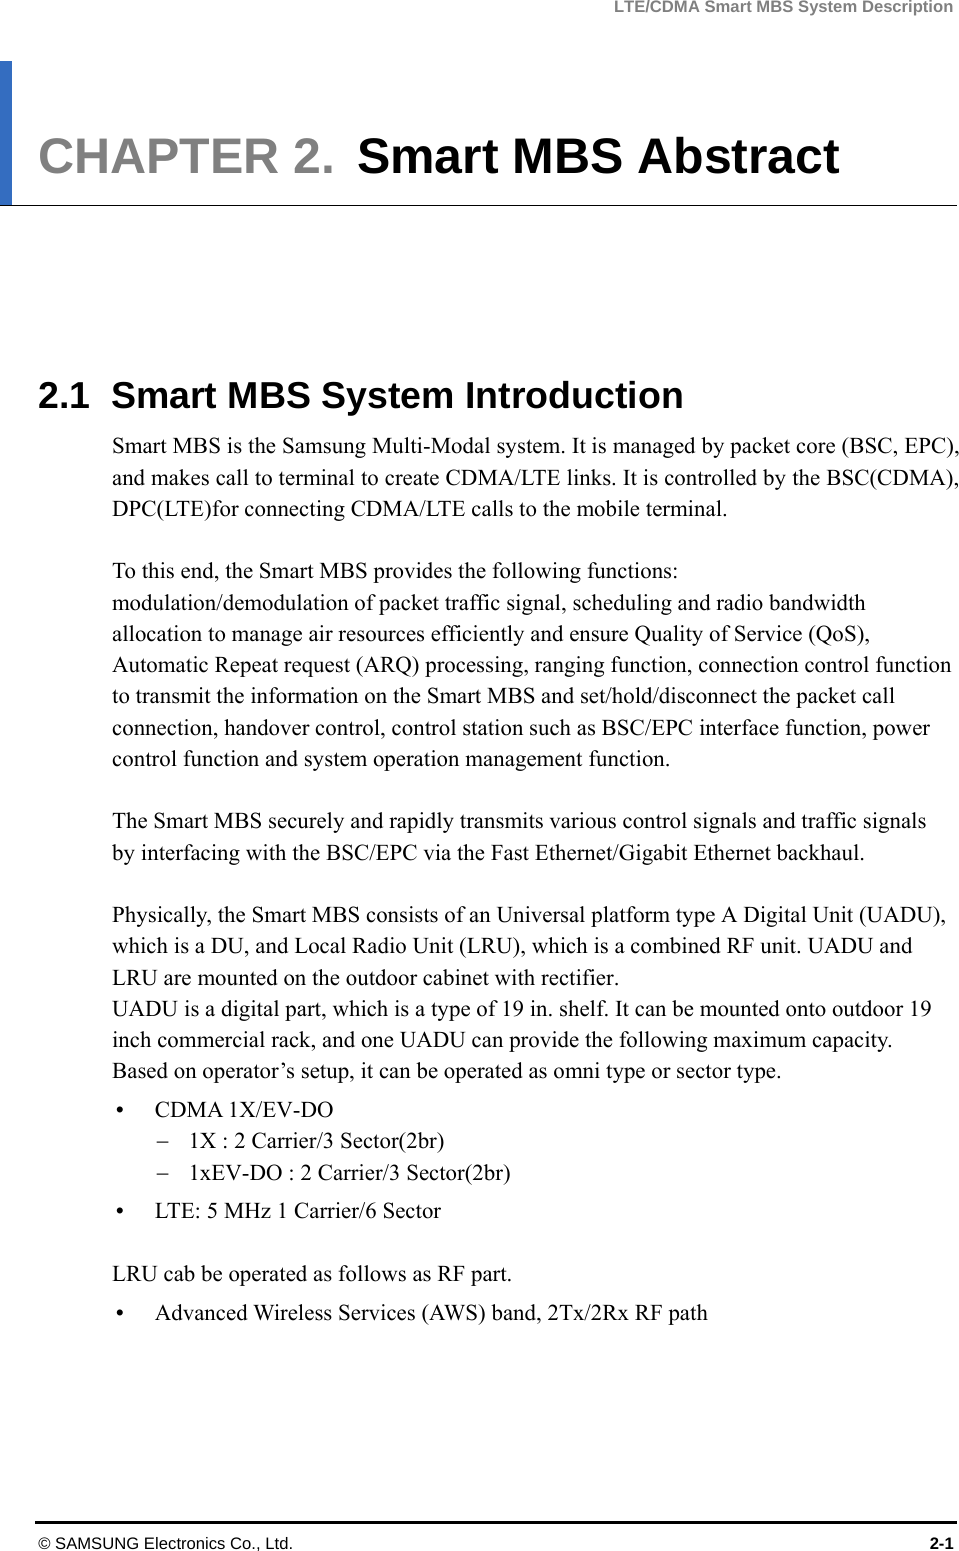 LTE/CDMA Smart MBS System Description © SAMSUNG Electronics Co., Ltd.  2-1 CHAPTER 2.  Smart MBS Abstract      2.1  Smart MBS System Introduction Smart MBS is the Samsung Multi-Modal system. It is managed by packet core (BSC, EPC), and makes call to terminal to create CDMA/LTE links. It is controlled by the BSC(CDMA), DPC(LTE)for connecting CDMA/LTE calls to the mobile terminal.  To this end, the Smart MBS provides the following functions: modulation/demodulation of packet traffic signal, scheduling and radio bandwidth allocation to manage air resources efficiently and ensure Quality of Service (QoS), Automatic Repeat request (ARQ) processing, ranging function, connection control function to transmit the information on the Smart MBS and set/hold/disconnect the packet call connection, handover control, control station such as BSC/EPC interface function, power control function and system operation management function.  The Smart MBS securely and rapidly transmits various control signals and traffic signals by interfacing with the BSC/EPC via the Fast Ethernet/Gigabit Ethernet backhaul.  Physically, the Smart MBS consists of an Universal platform type A Digital Unit (UADU), which is a DU, and Local Radio Unit (LRU), which is a combined RF unit. UADU and LRU are mounted on the outdoor cabinet with rectifier.   UADU is a digital part, which is a type of 19 in. shelf. It can be mounted onto outdoor 19 inch commercial rack, and one UADU can provide the following maximum capacity. Based on operator’s setup, it can be operated as omni type or sector type.  CDMA 1X/EV-DO  1X : 2 Carrier/3 Sector(2br)  1xEV-DO : 2 Carrier/3 Sector(2br)    LTE: 5 MHz 1 Carrier/6 Sector  LRU cab be operated as follows as RF part.  Advanced Wireless Services (AWS) band, 2Tx/2Rx RF path  